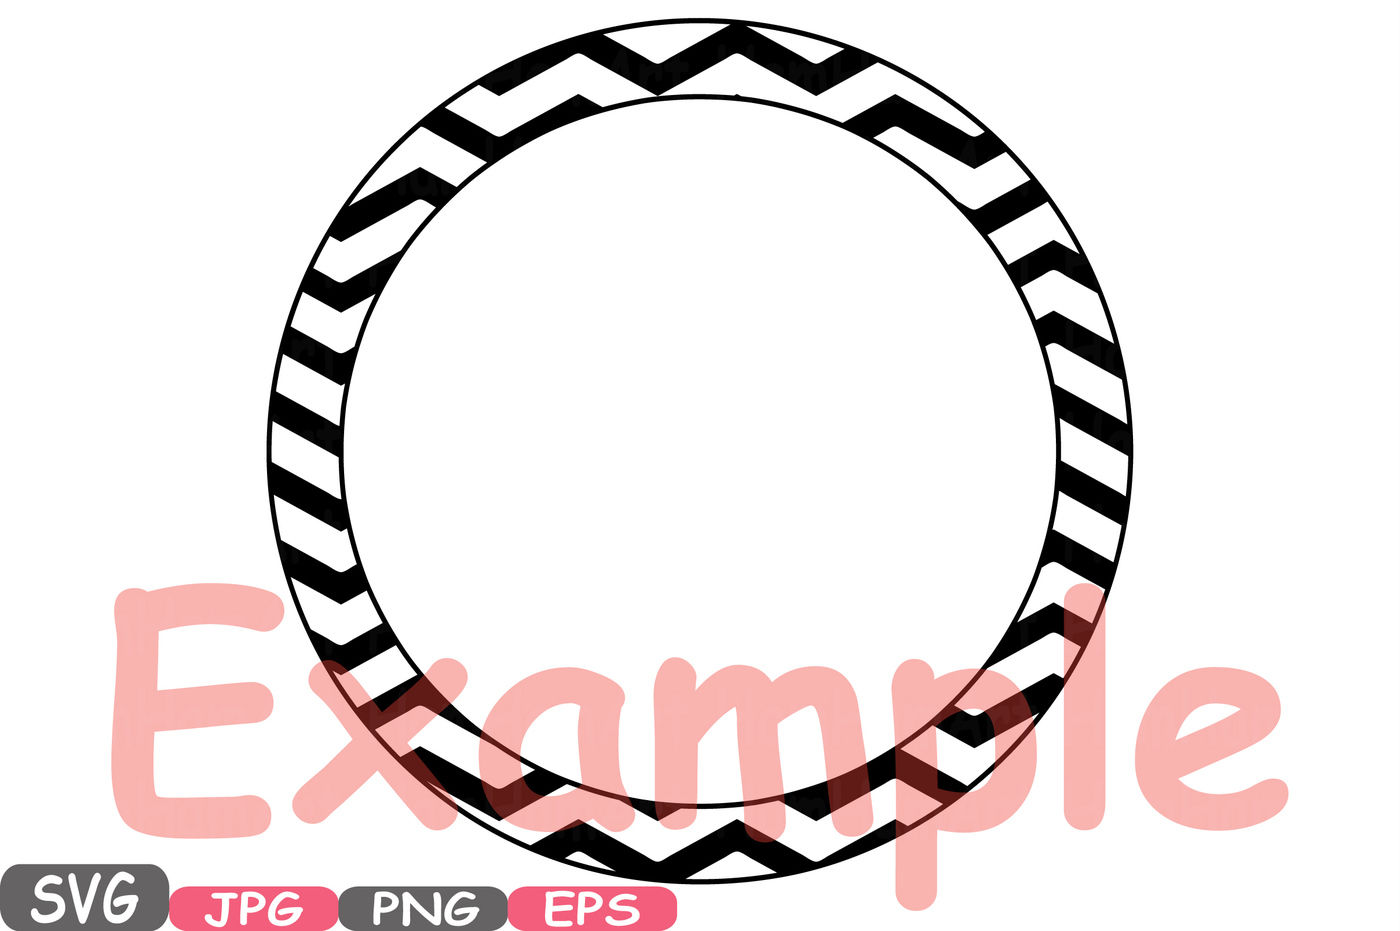 Download Stripes Circle Alphabet SVG Silhouette Letters ABC Cutting Files sign icons Cricut Design cameo ...